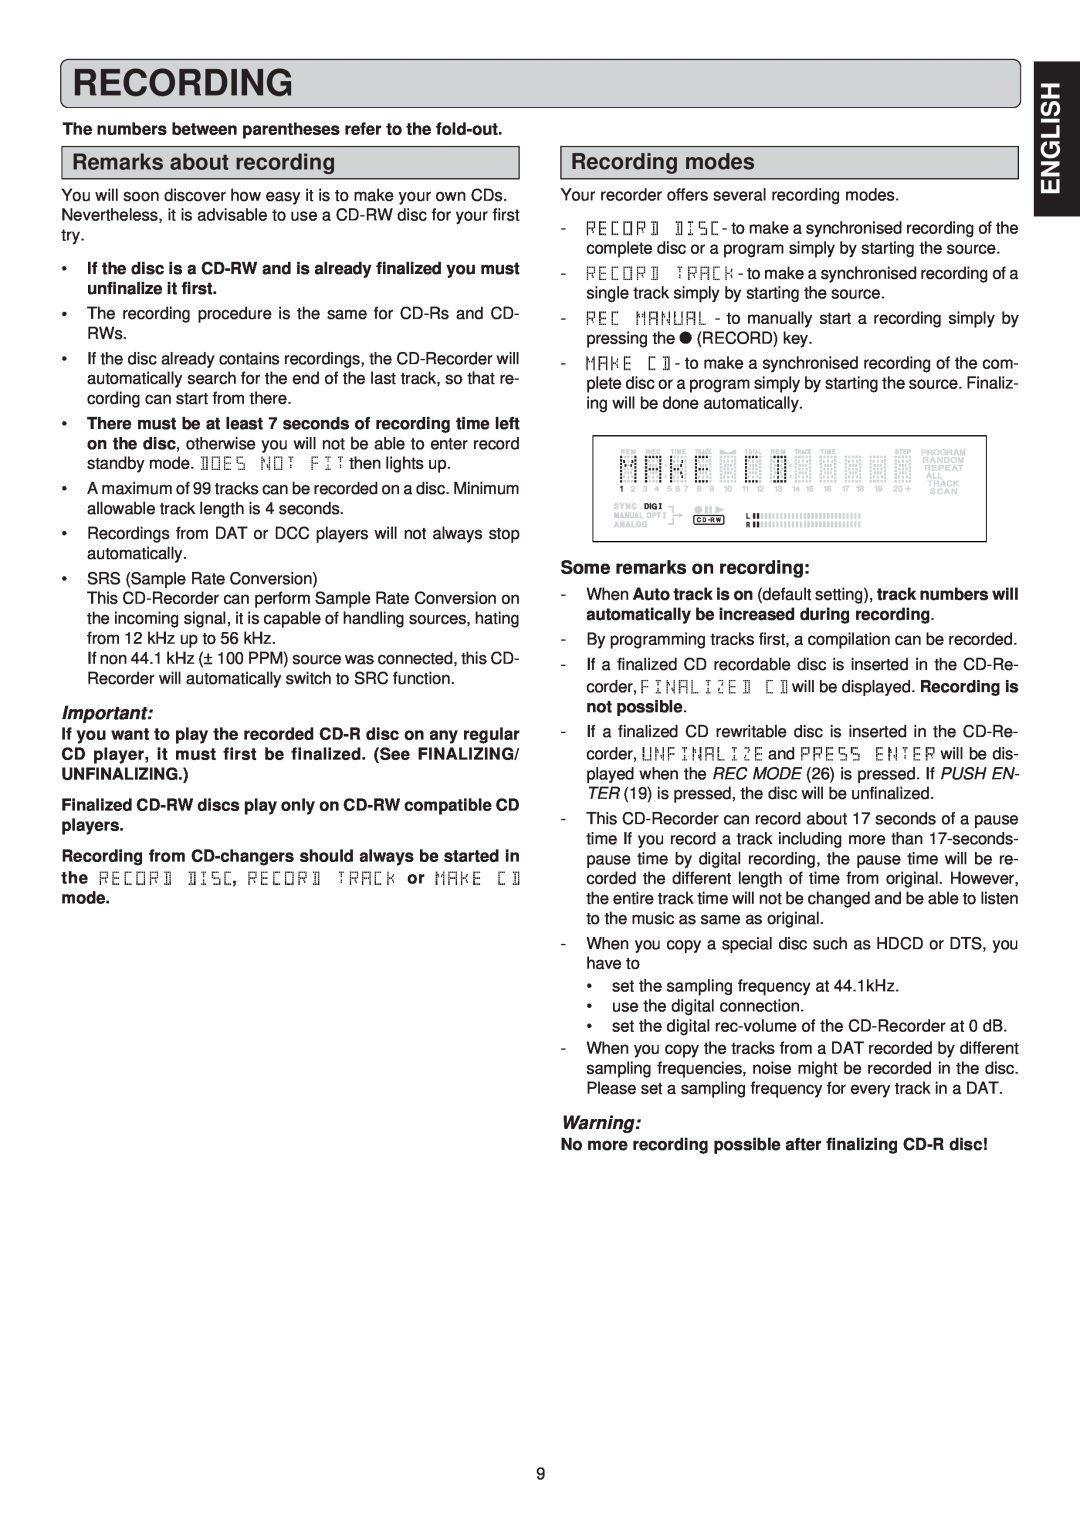 Marantz CDR631 manual Remarks about recording, Recording modes, Some remarks on recording, English, not possible 